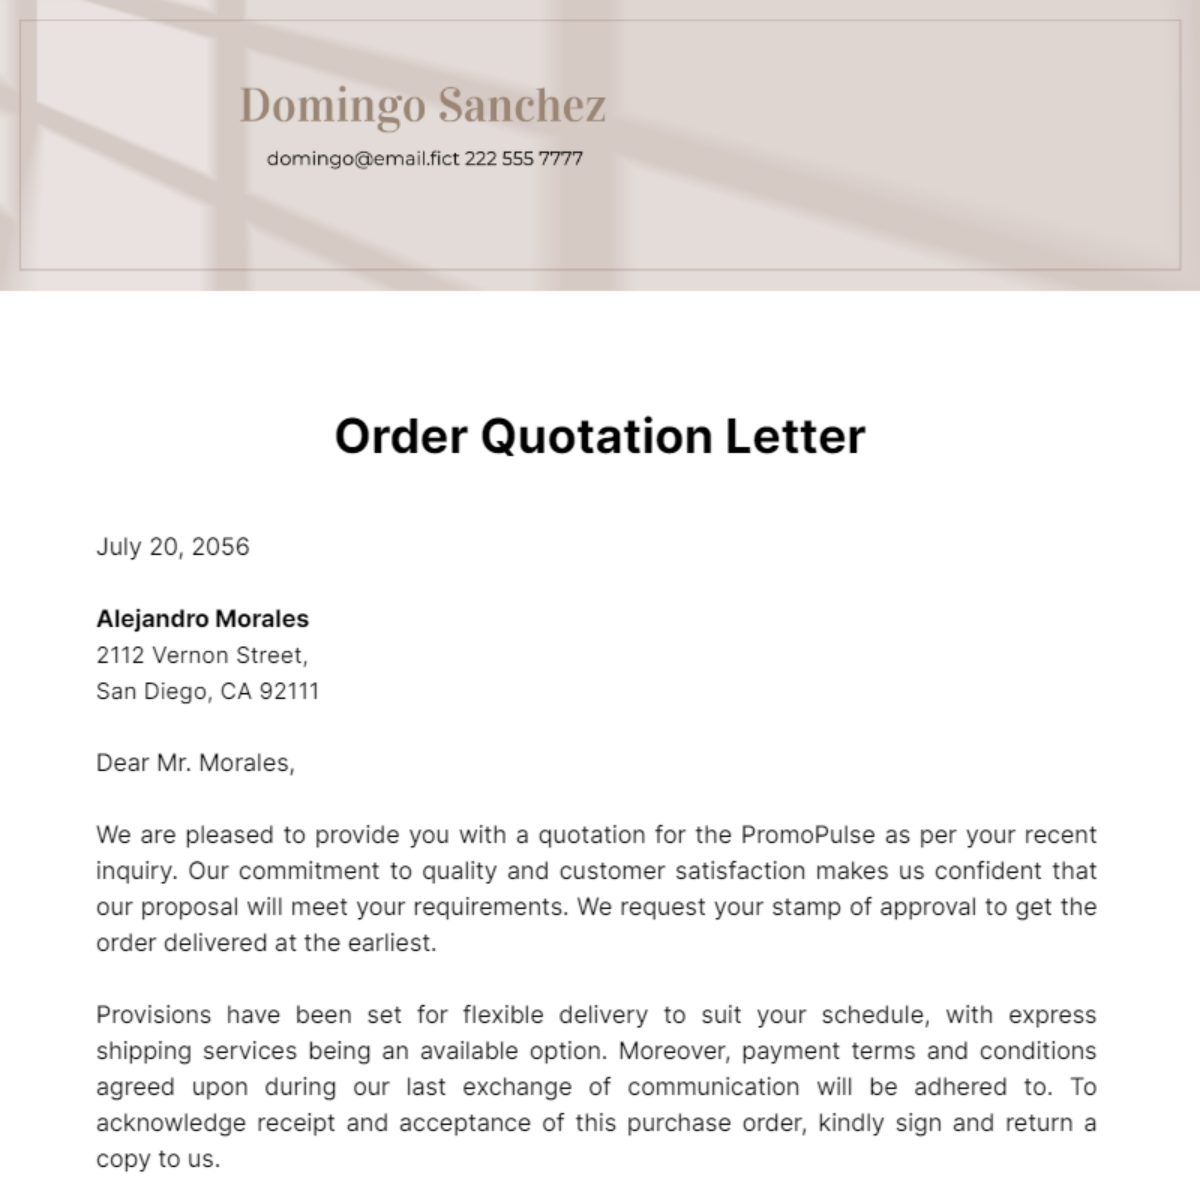 Order Quotation Letter Template